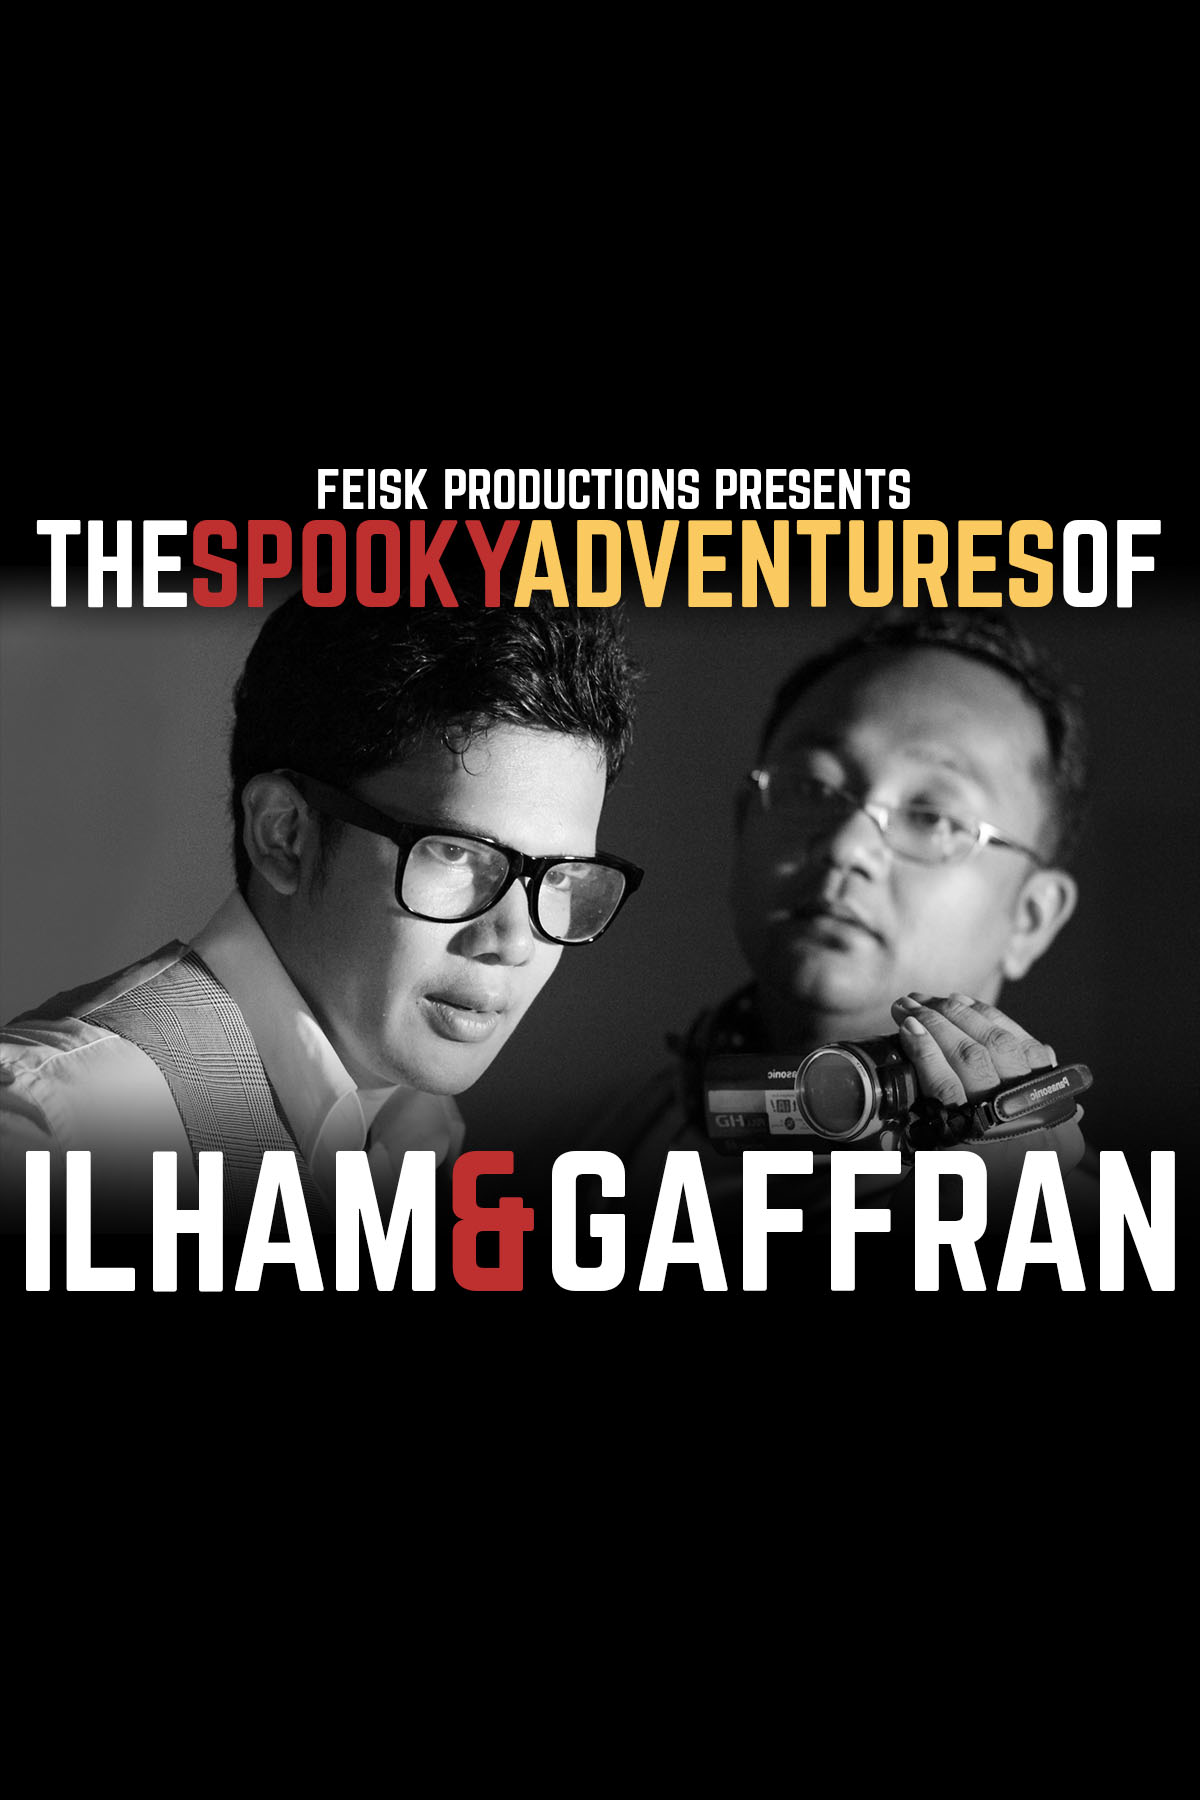 The Spooky Adventures of Ilham & Gaffran